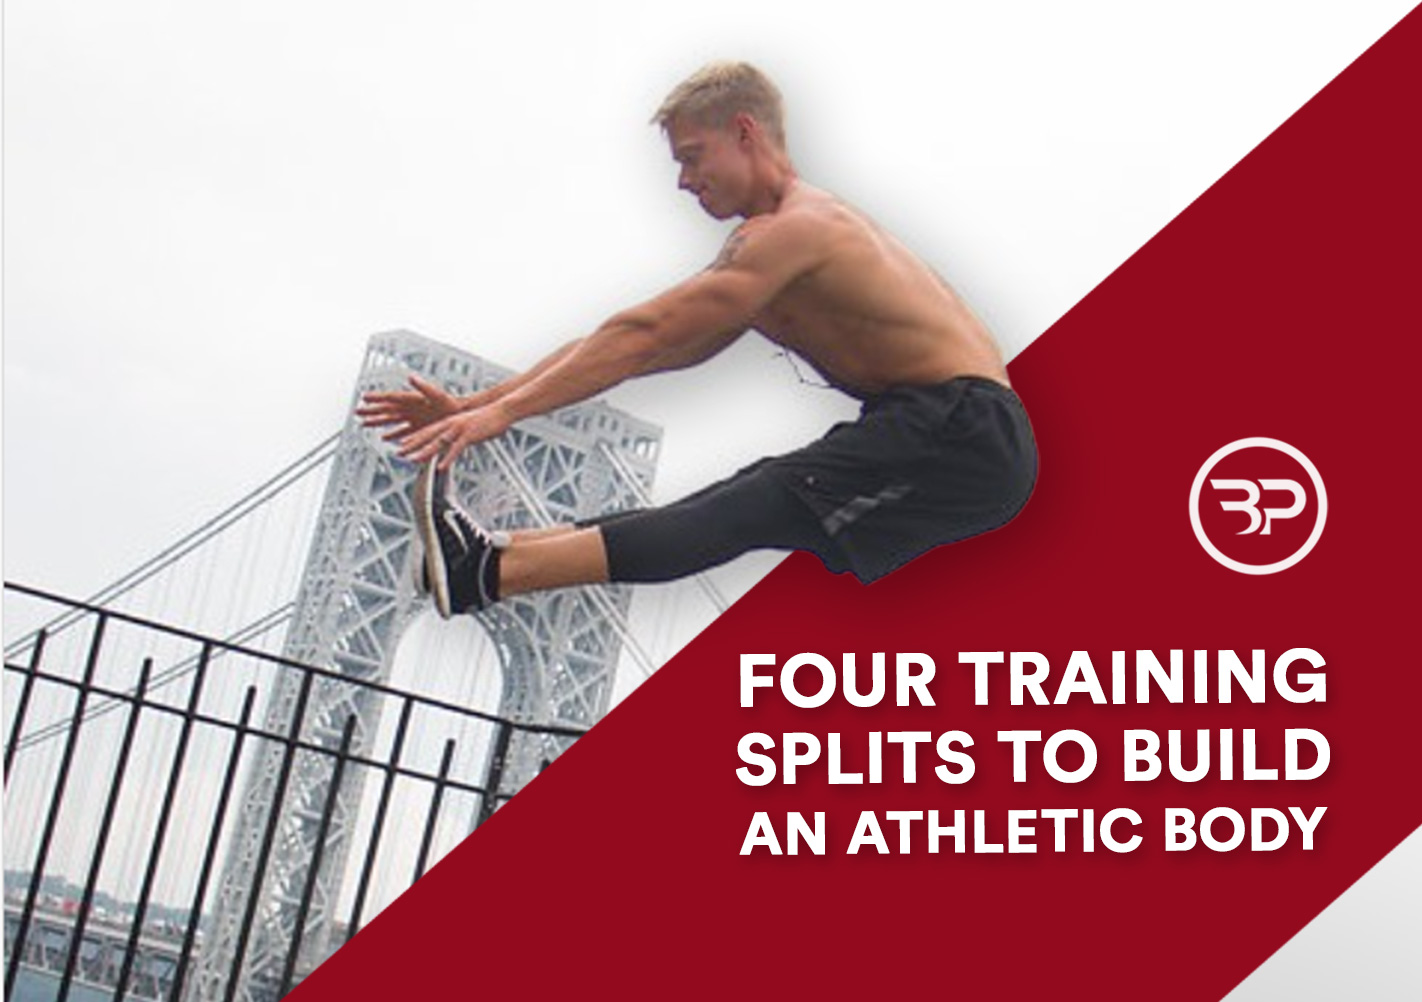 https://bachperformance.com/wp-content/uploads/2016/03/Four-Training-Splits-to-Build-an-Athletic-Body.jpg